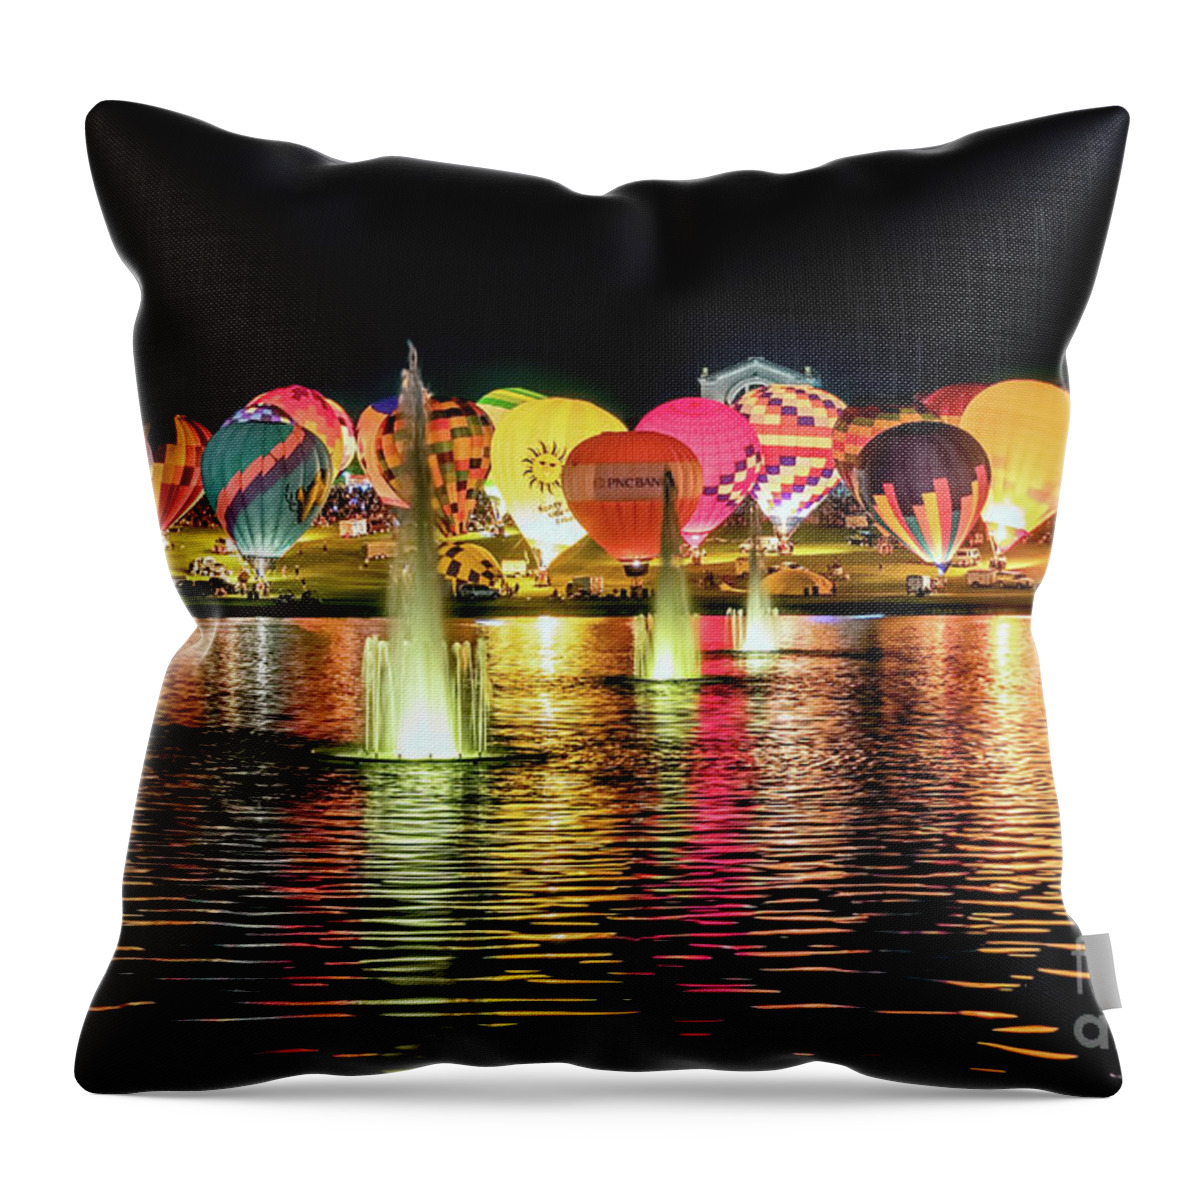 Balloon Glow Throw Pillow featuring the photograph Balloon Glow by Tom Watkins PVminer pixs